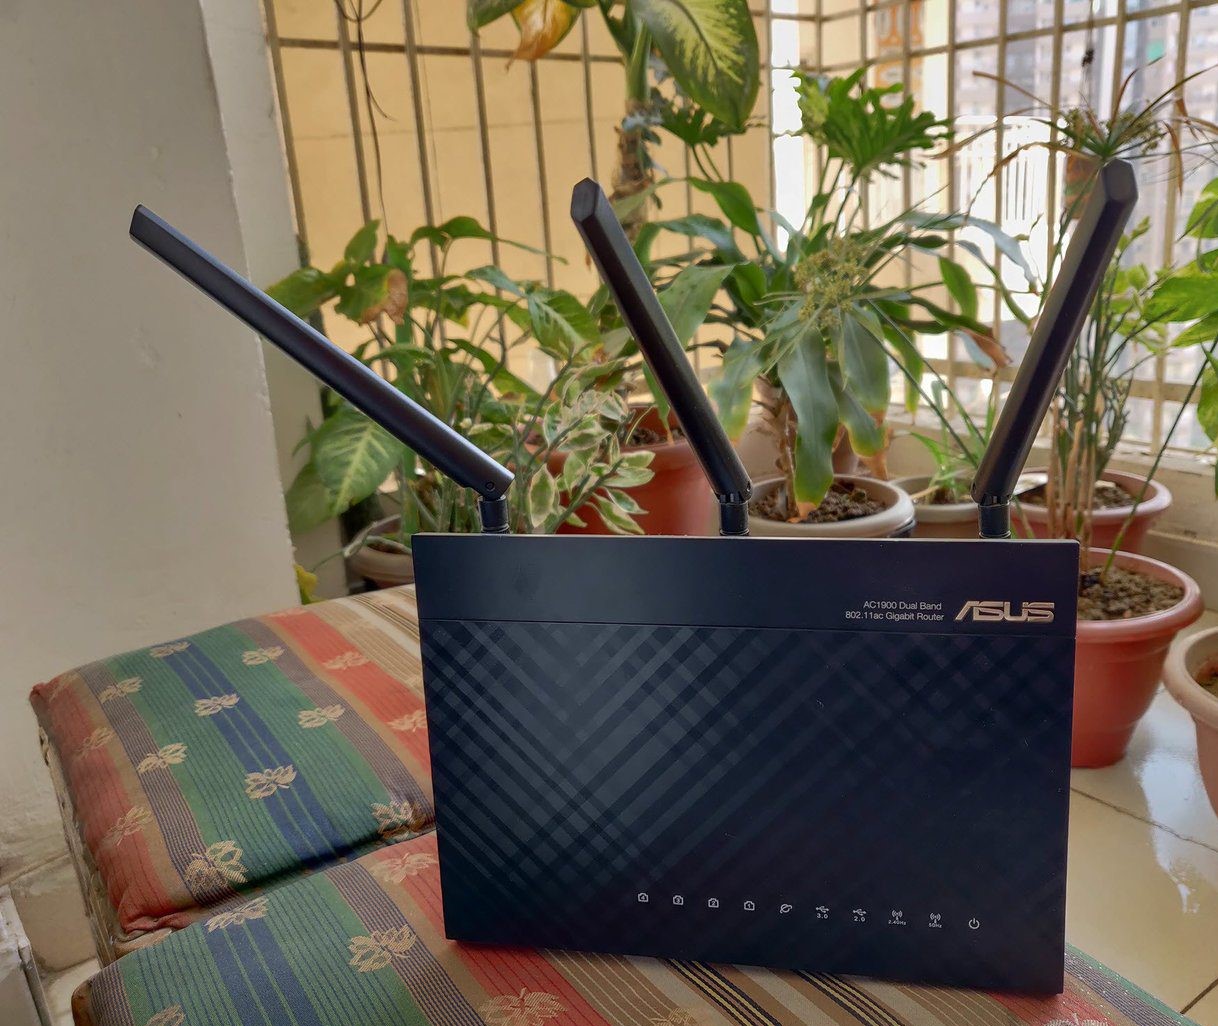 How To Change Asus Wi-Fi Router Password | Storables